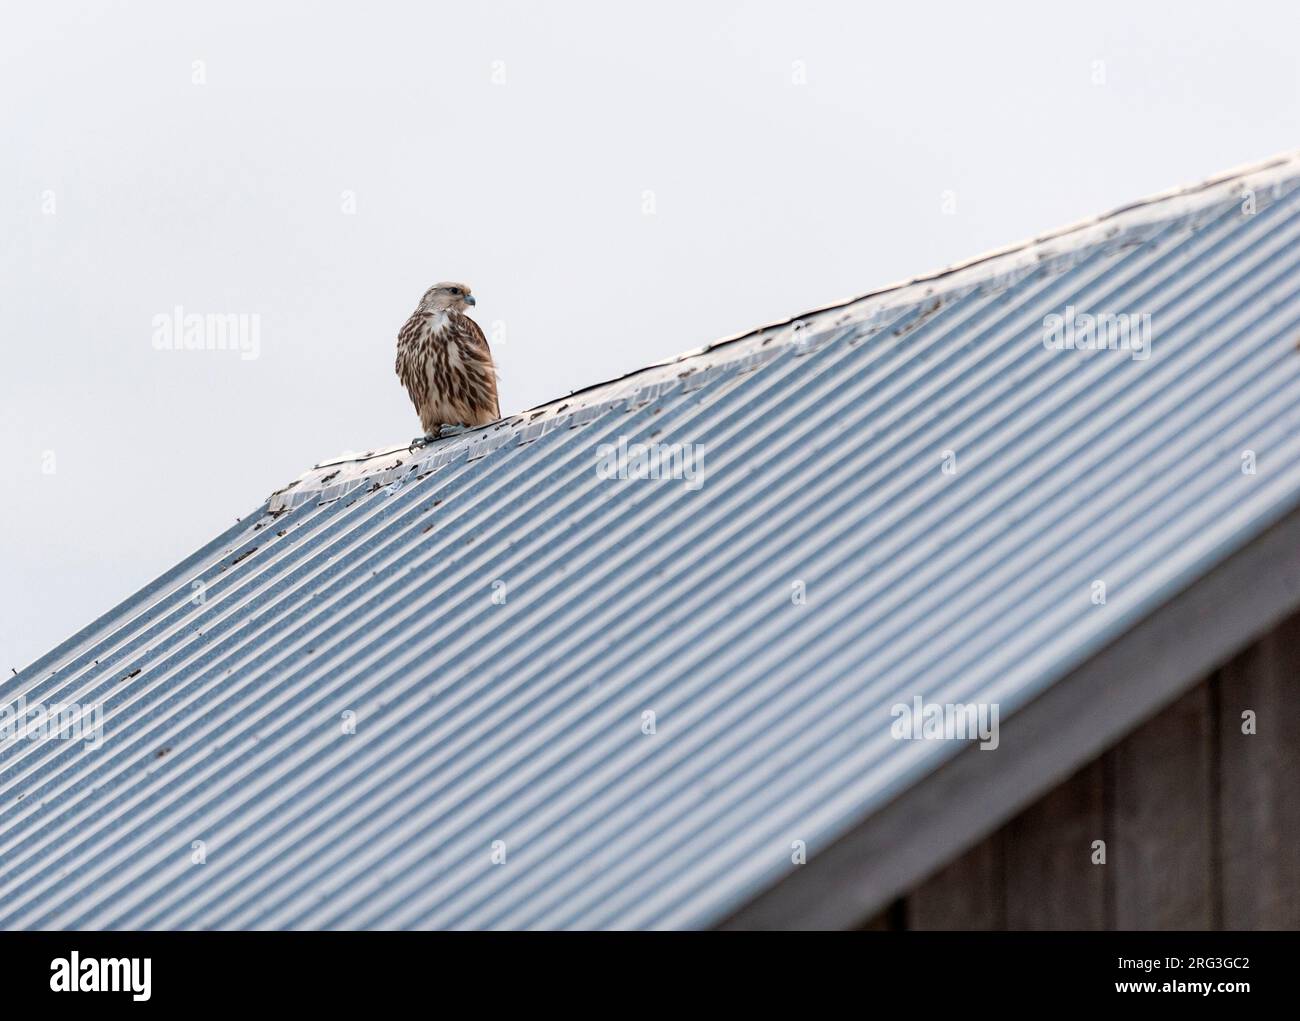 Immature Saker Falcon (Falco cherrug). Frontal view of an escaped bird perched on roof ridge against pale blue sky. This endangered species breeds in Stock Photo